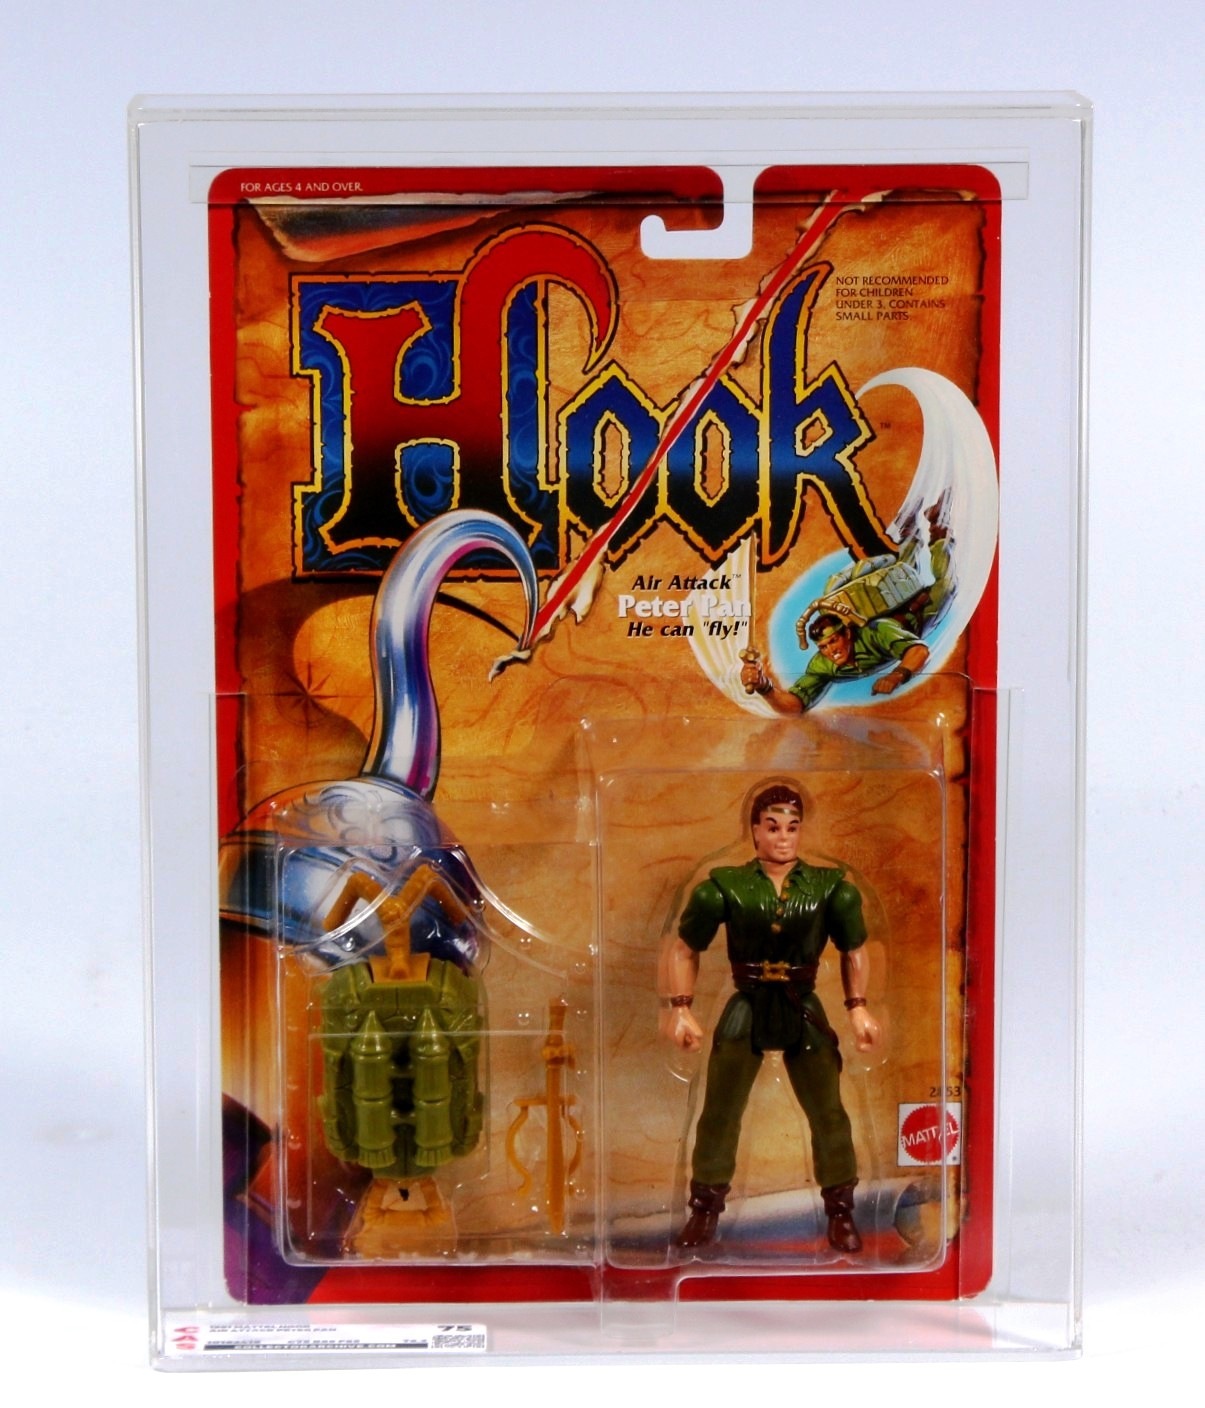 1991 Mattel Hook Carded Action Figure - Air Attack Peter Pan